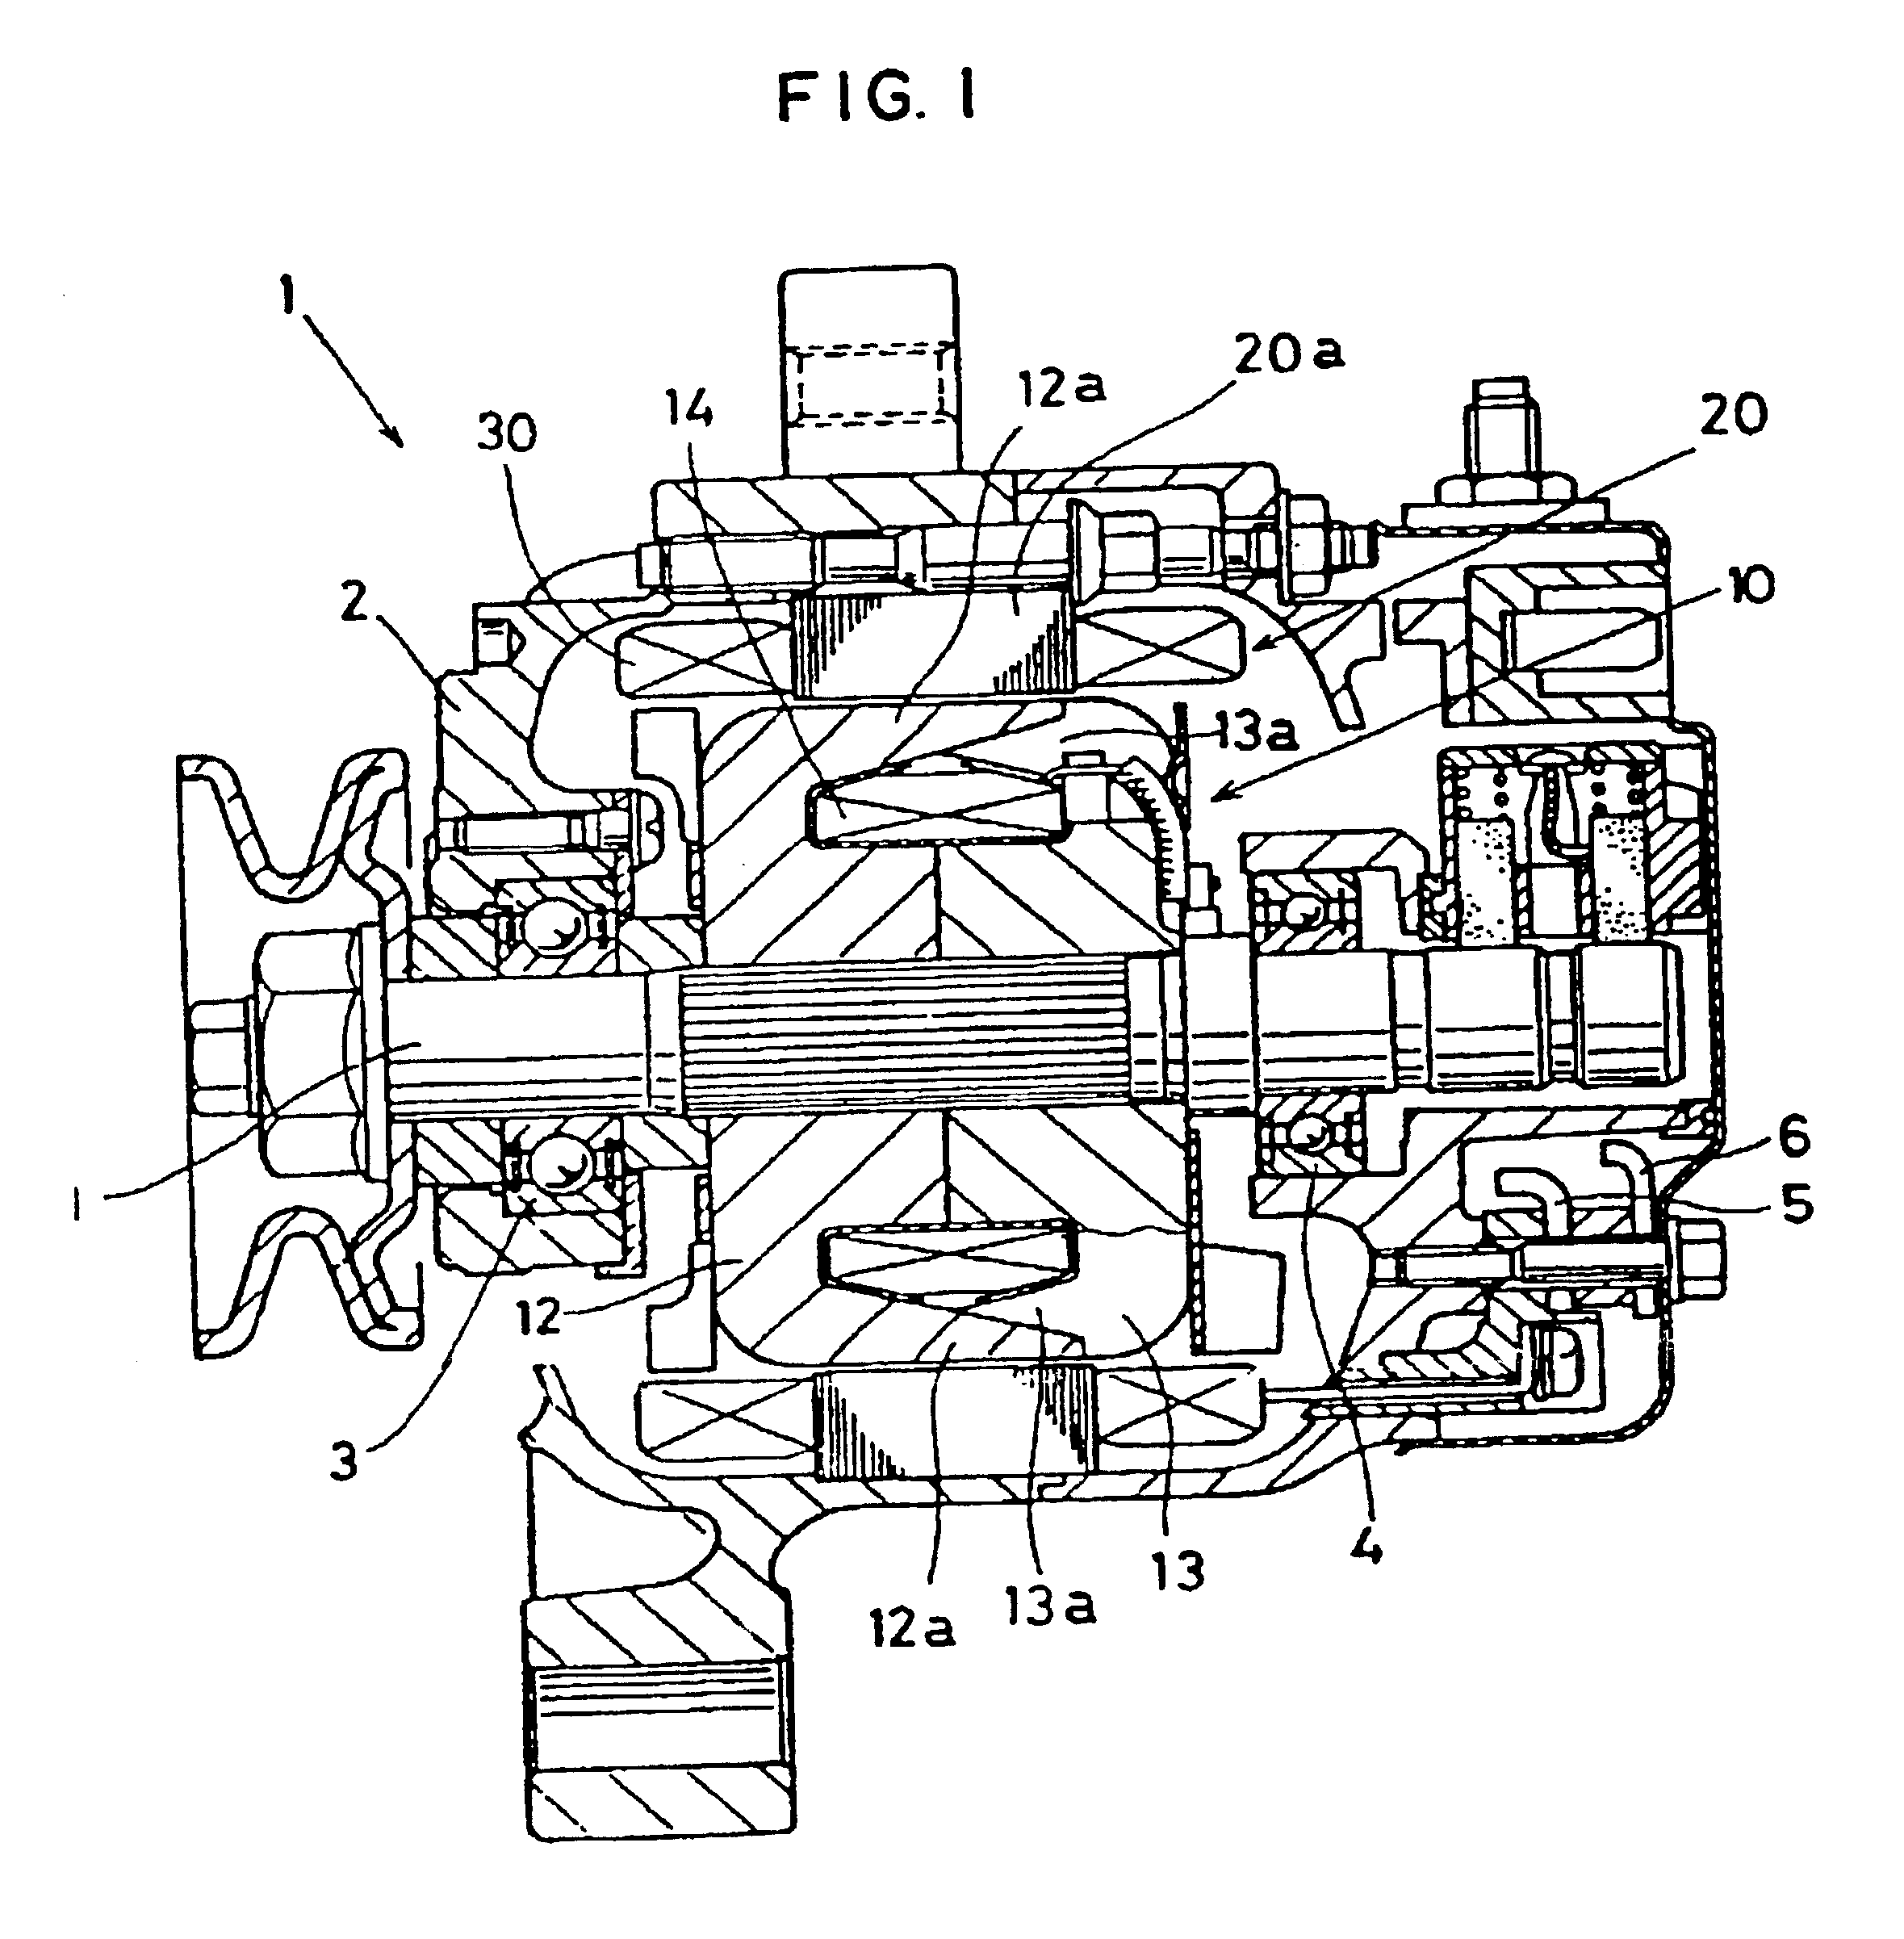 Alternating current generator having a plurality of independent three-phase windings